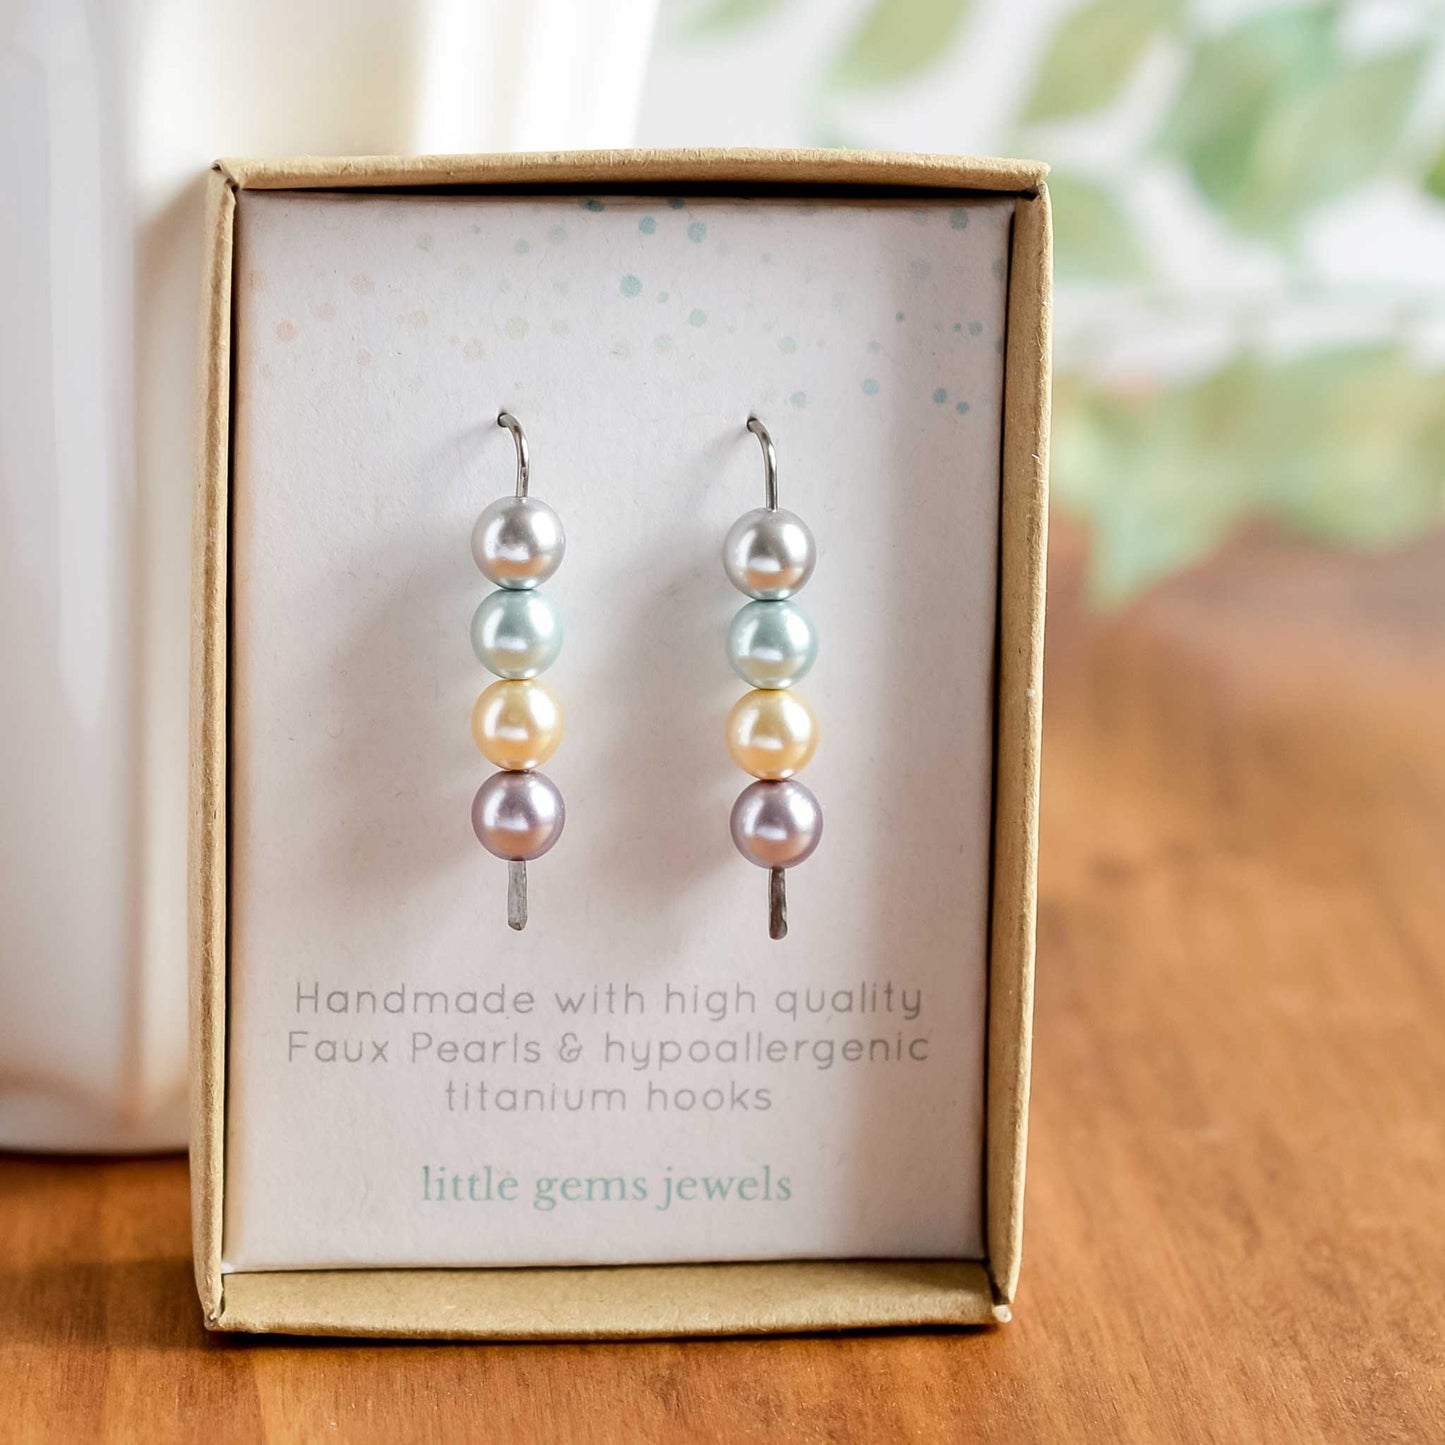 Faux pastel pearl stack earrings in eco friendly gift box